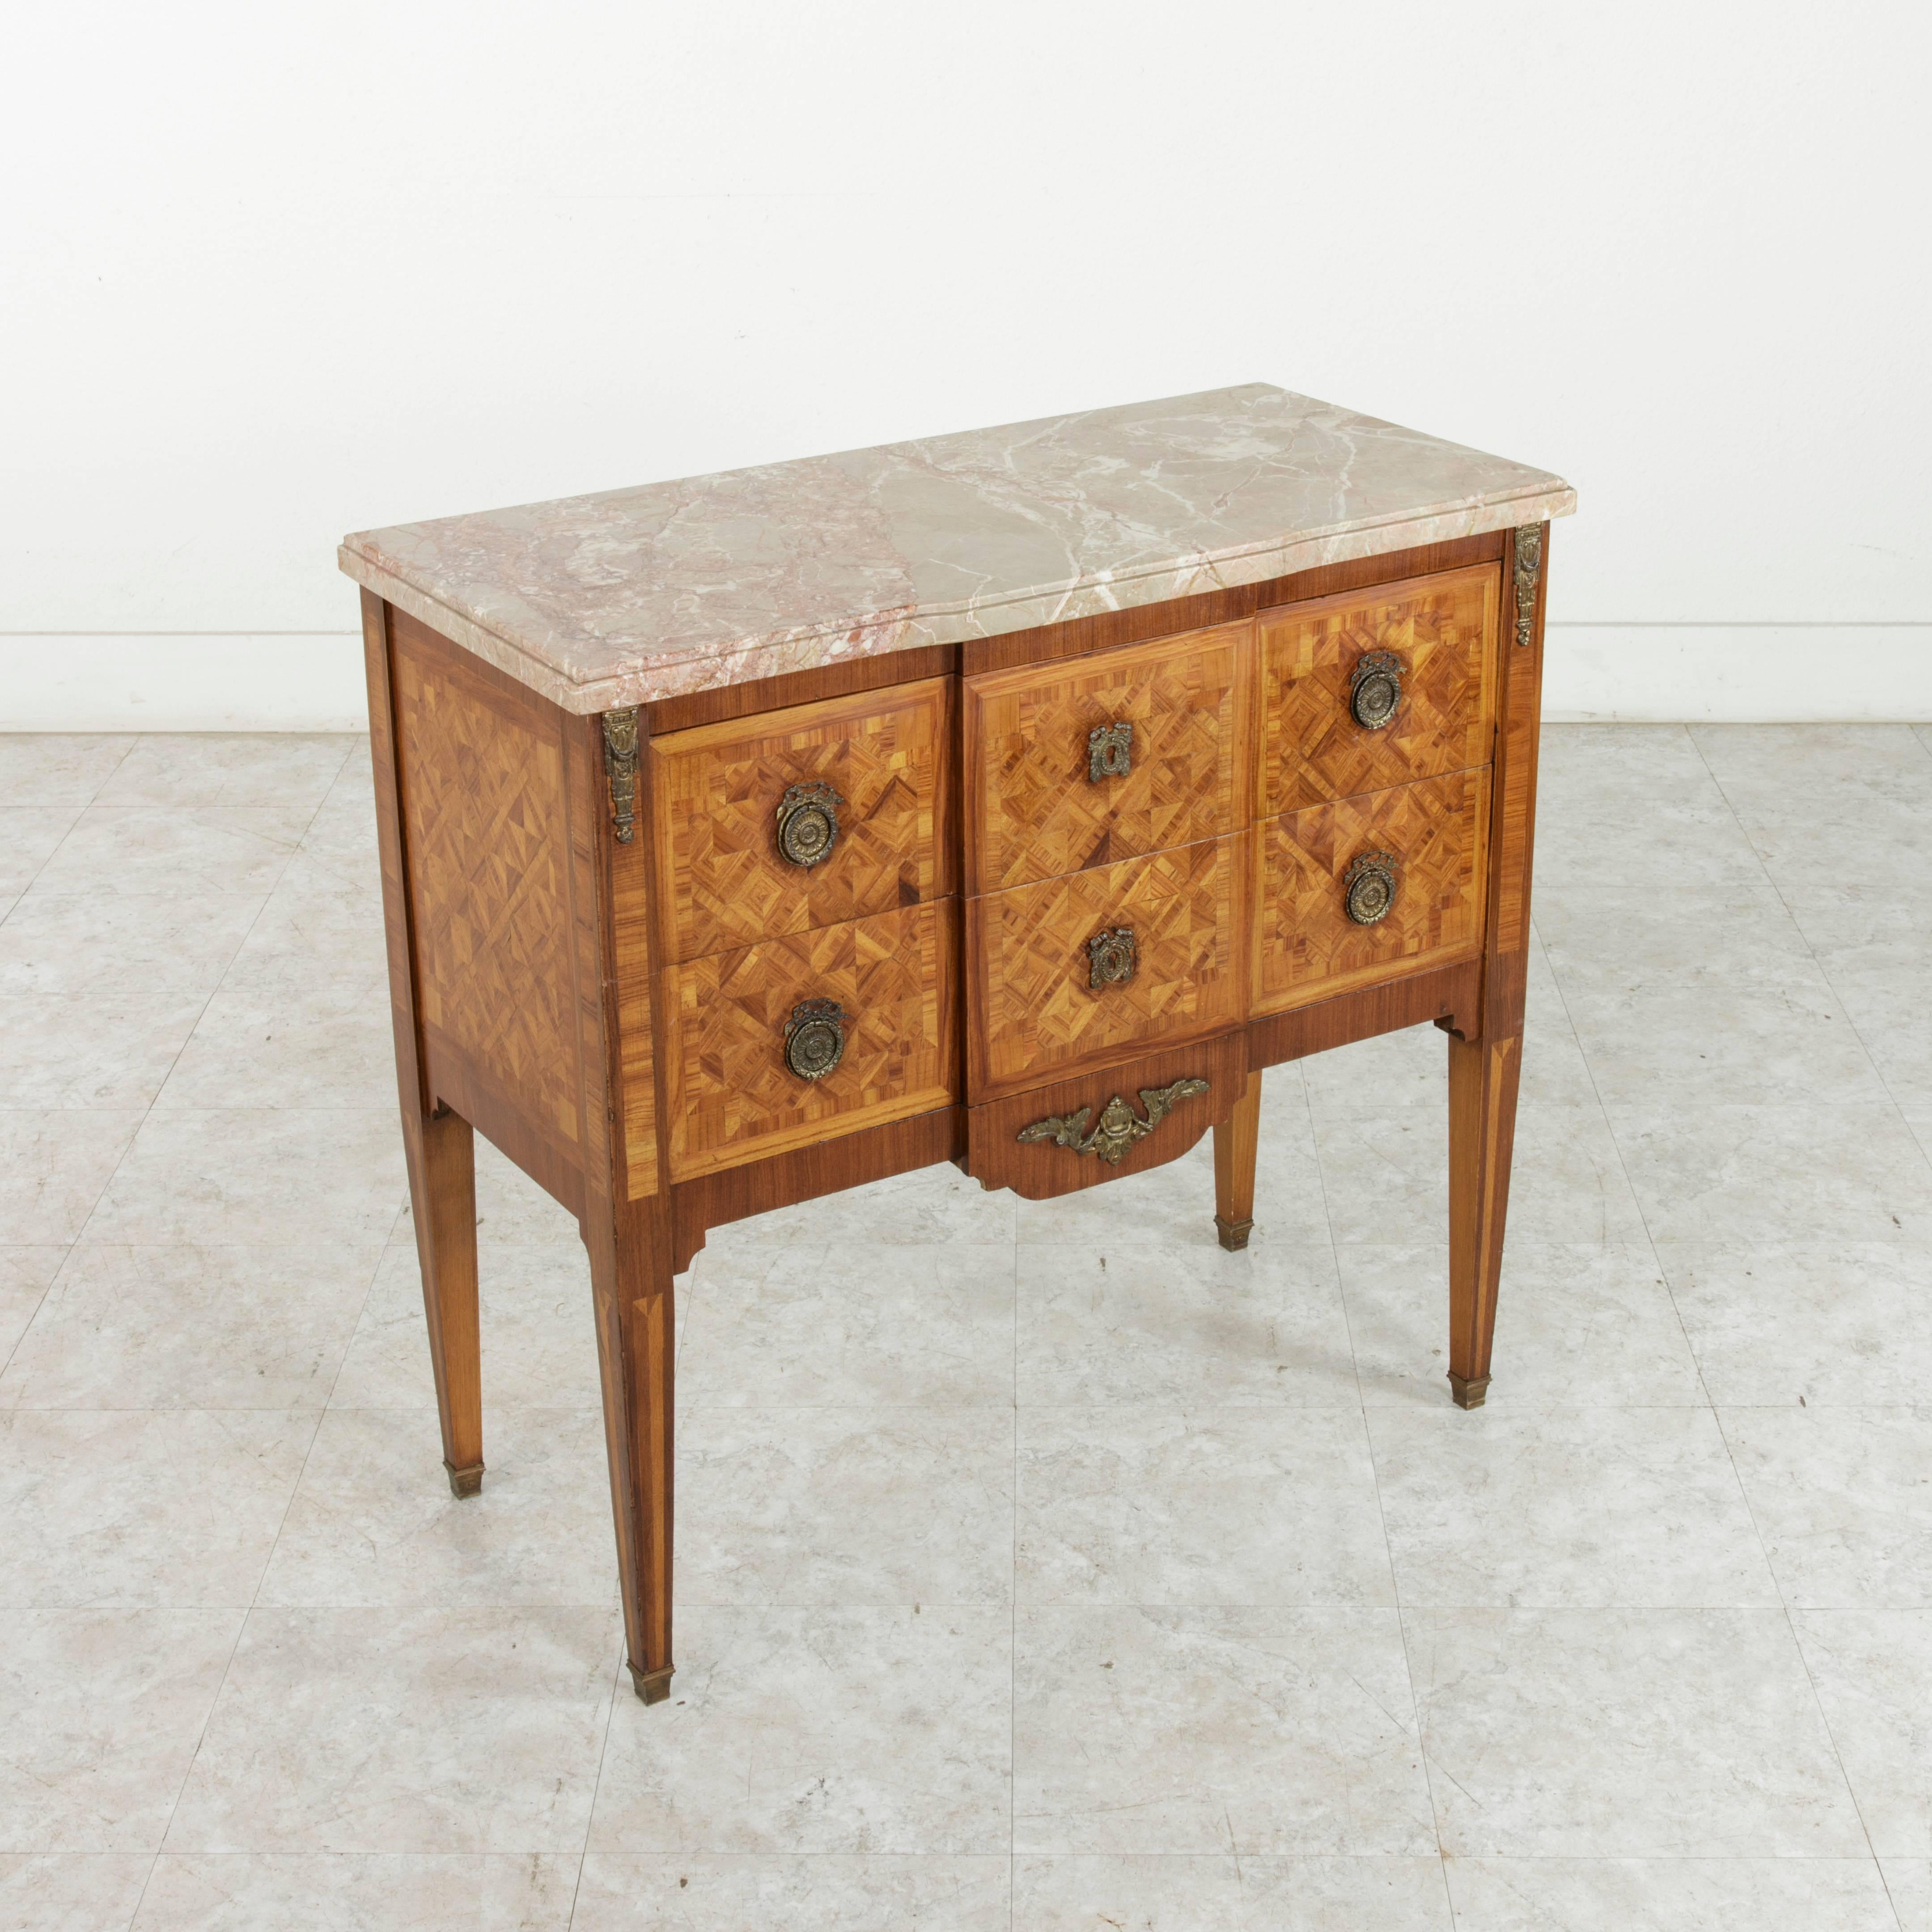 This small-scale early 20th century Louis XVI style commode or chest features geometric patterns of rosewood marquetry on three sides and is crowned with a bevelled marble top. Called a sauteuse in French, this fine chest has two drawers of dovetail